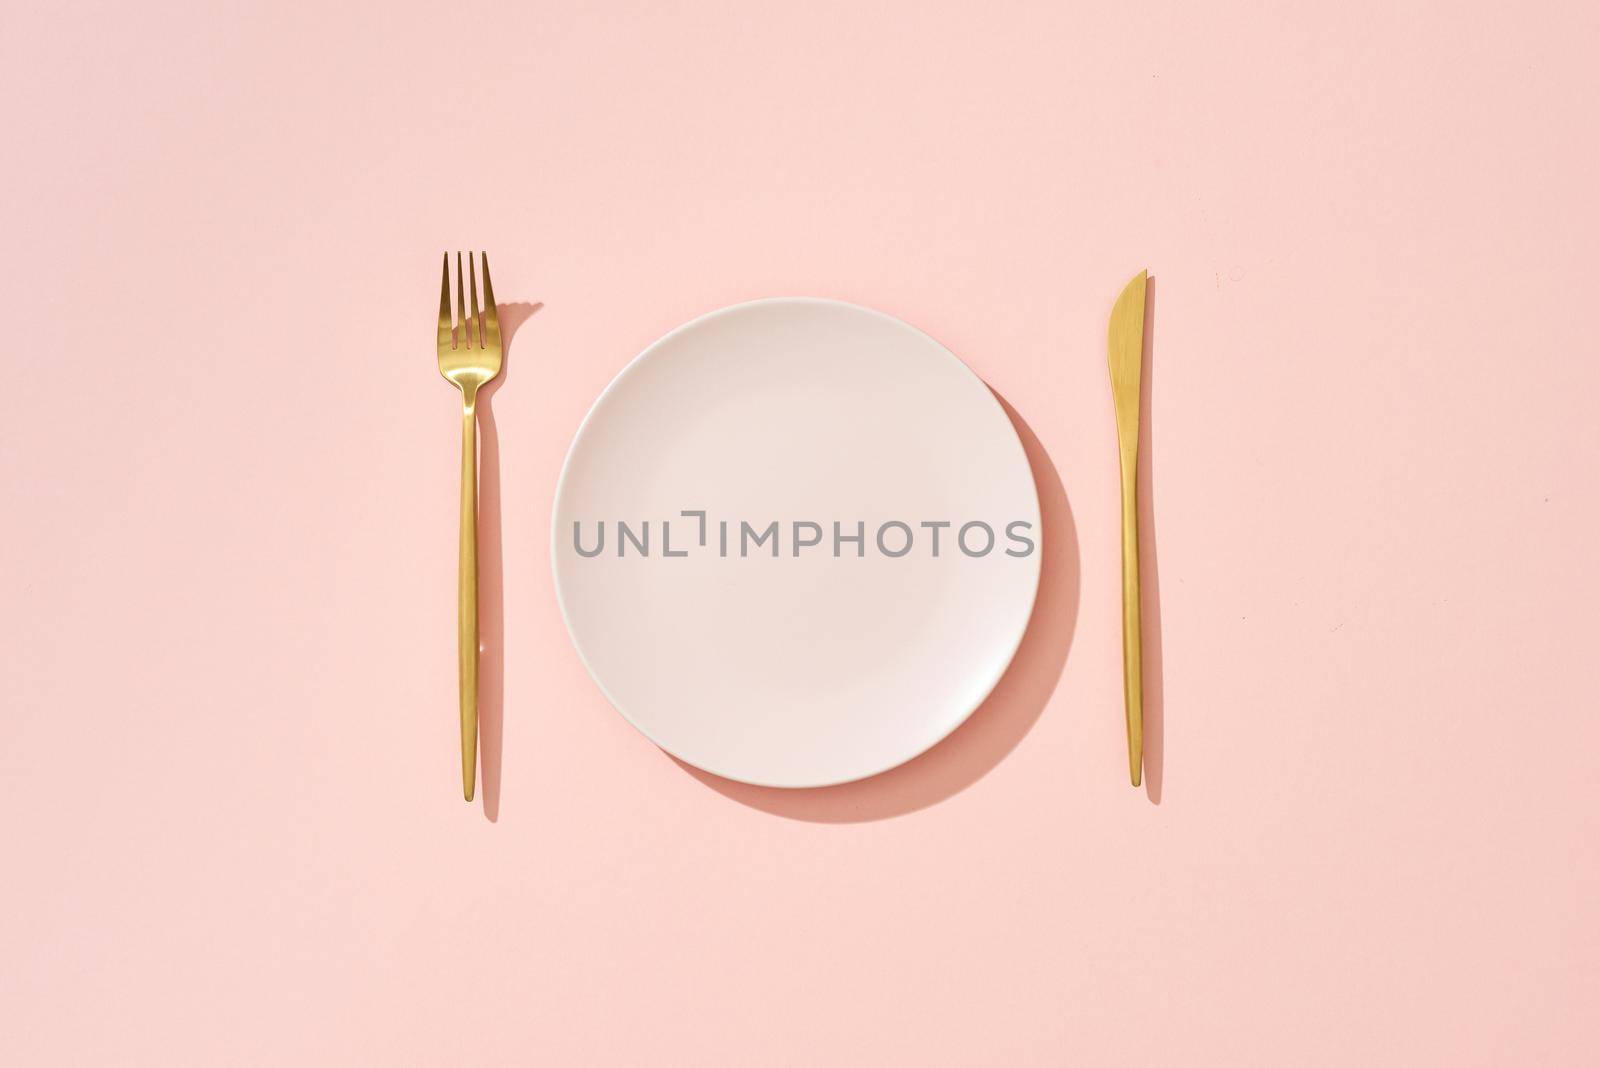 Knife, pastel pink plate and fork on pink background by makidotvn